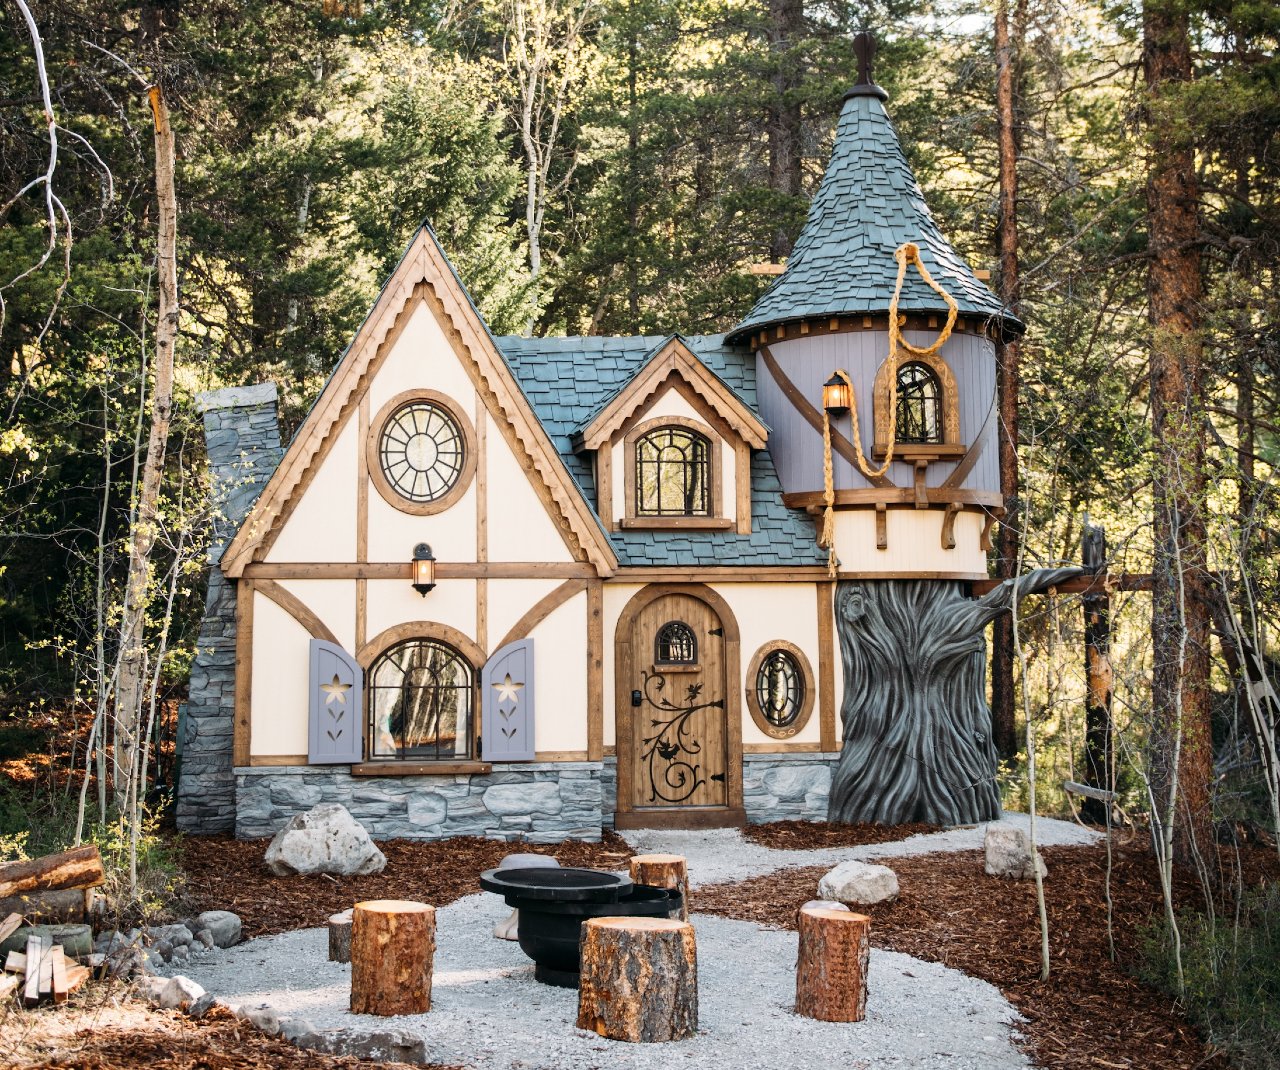 The yard at Rapunzel's abode by Charmed Resorts in Alberta